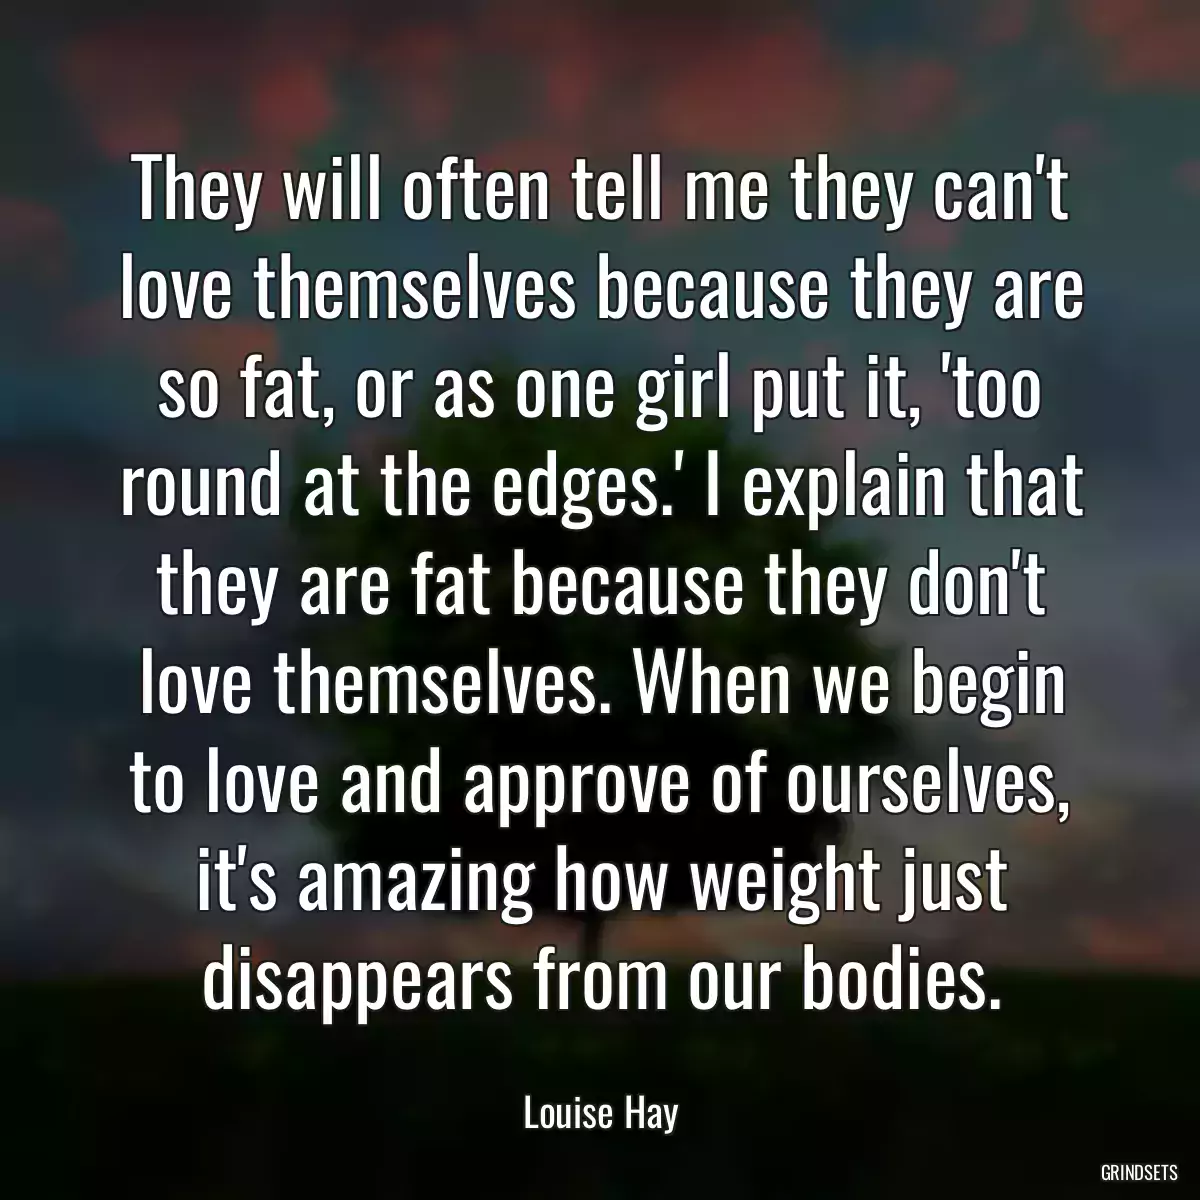 They will often tell me they can\'t love themselves because they are so fat, or as one girl put it, \'too round at the edges.\' I explain that they are fat because they don\'t love themselves. When we begin to love and approve of ourselves, it\'s amazing how weight just disappears from our bodies.